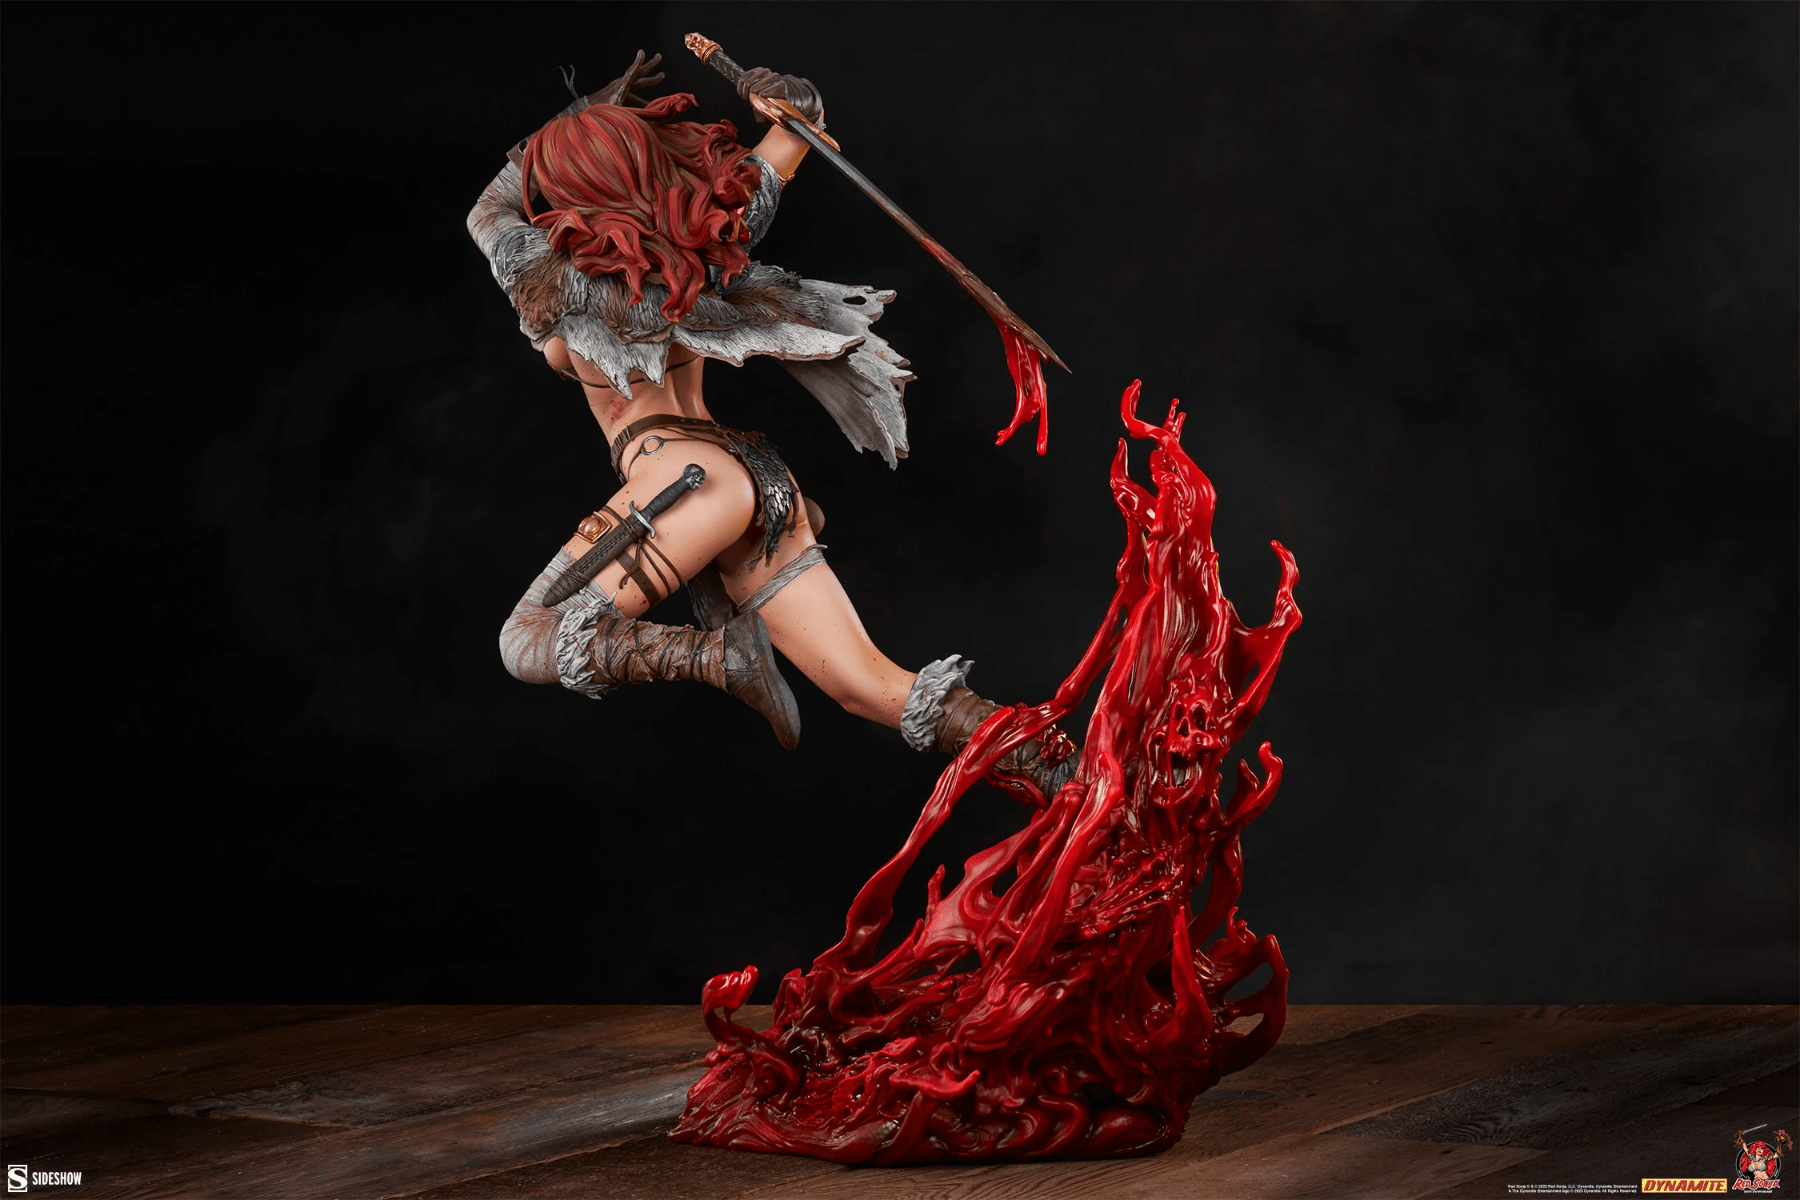 SID300813 Red Sonja - A Savage Sword Premium Format Statue - Sideshow Collectibles - Titan Pop Culture